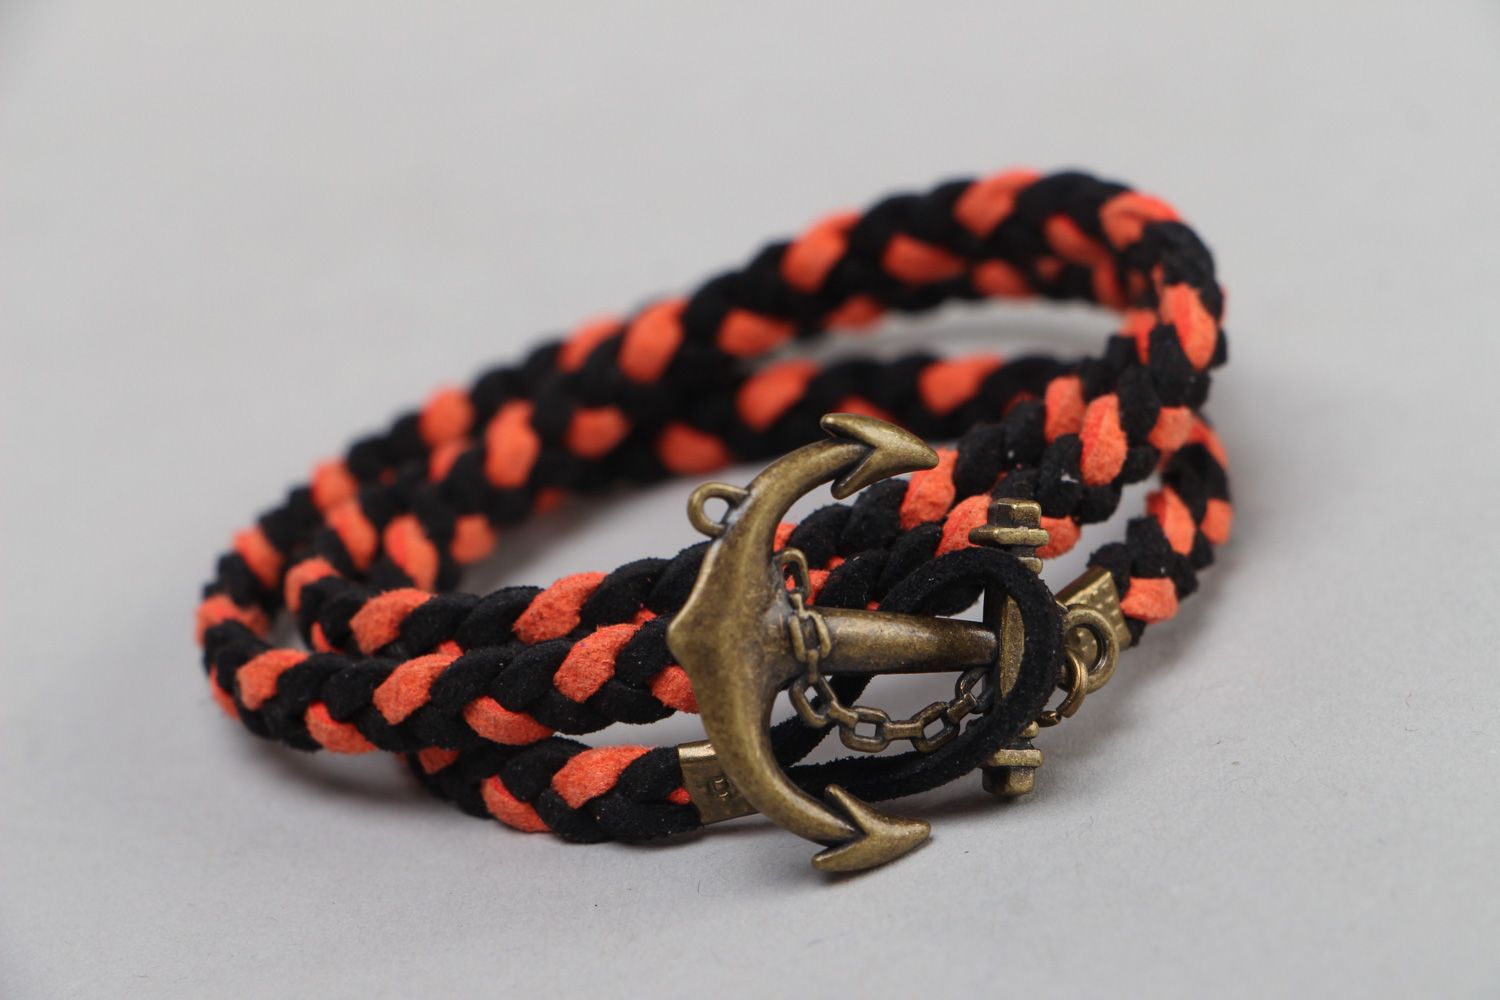 Handmade marine bracelet woven of faux suede cord of black and orange colors photo 1